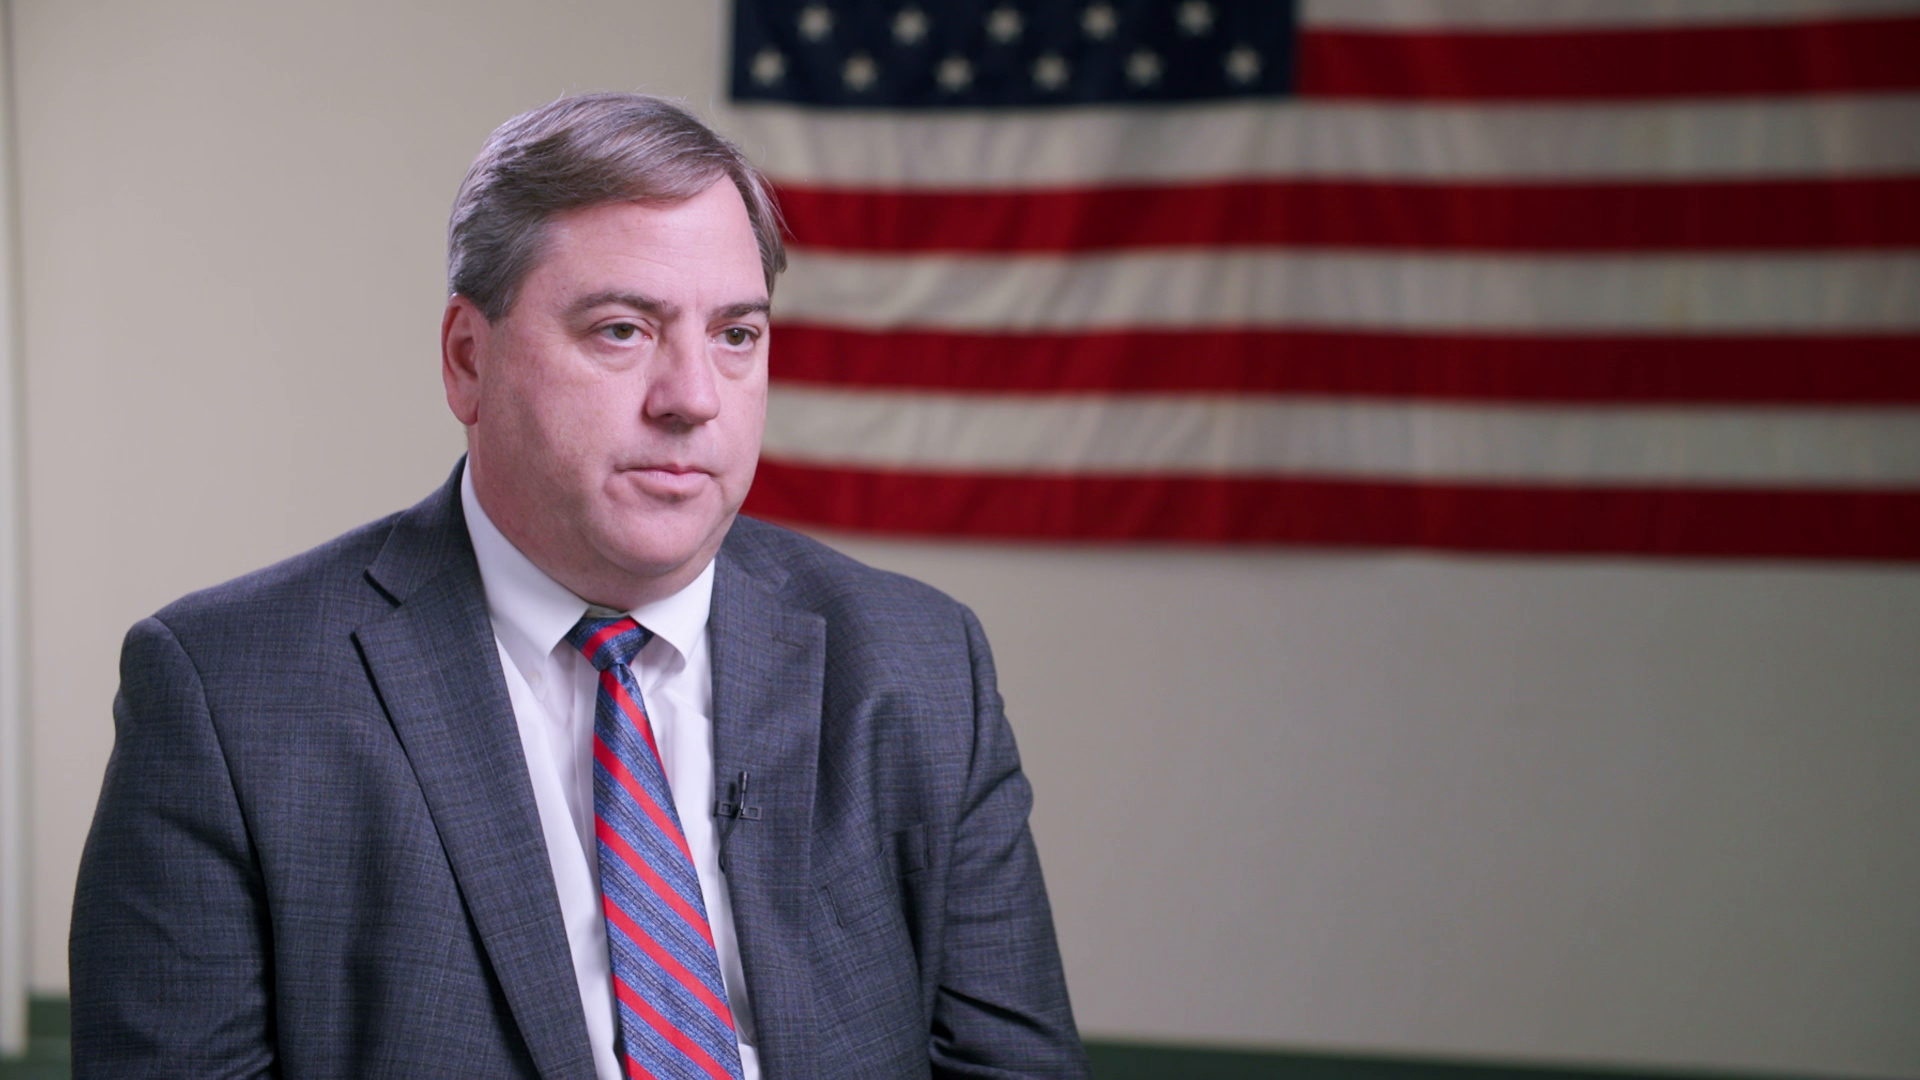 Paul Farrow sits in a room with a U.S. flag in the background.